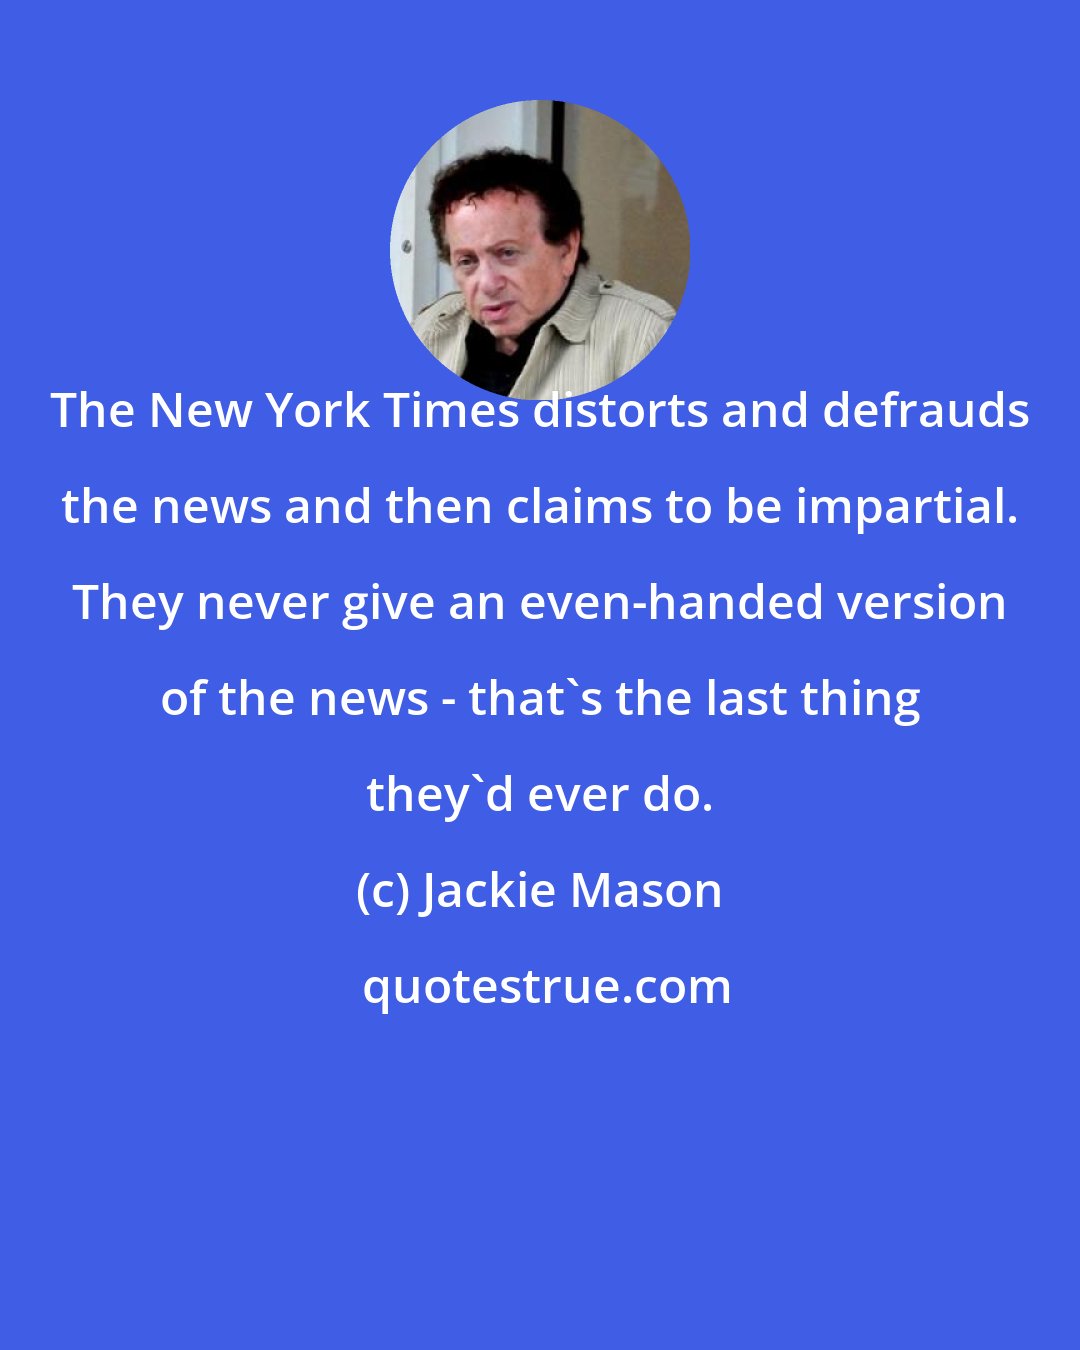 Jackie Mason: The New York Times distorts and defrauds the news and then claims to be impartial. They never give an even-handed version of the news - that's the last thing they'd ever do.